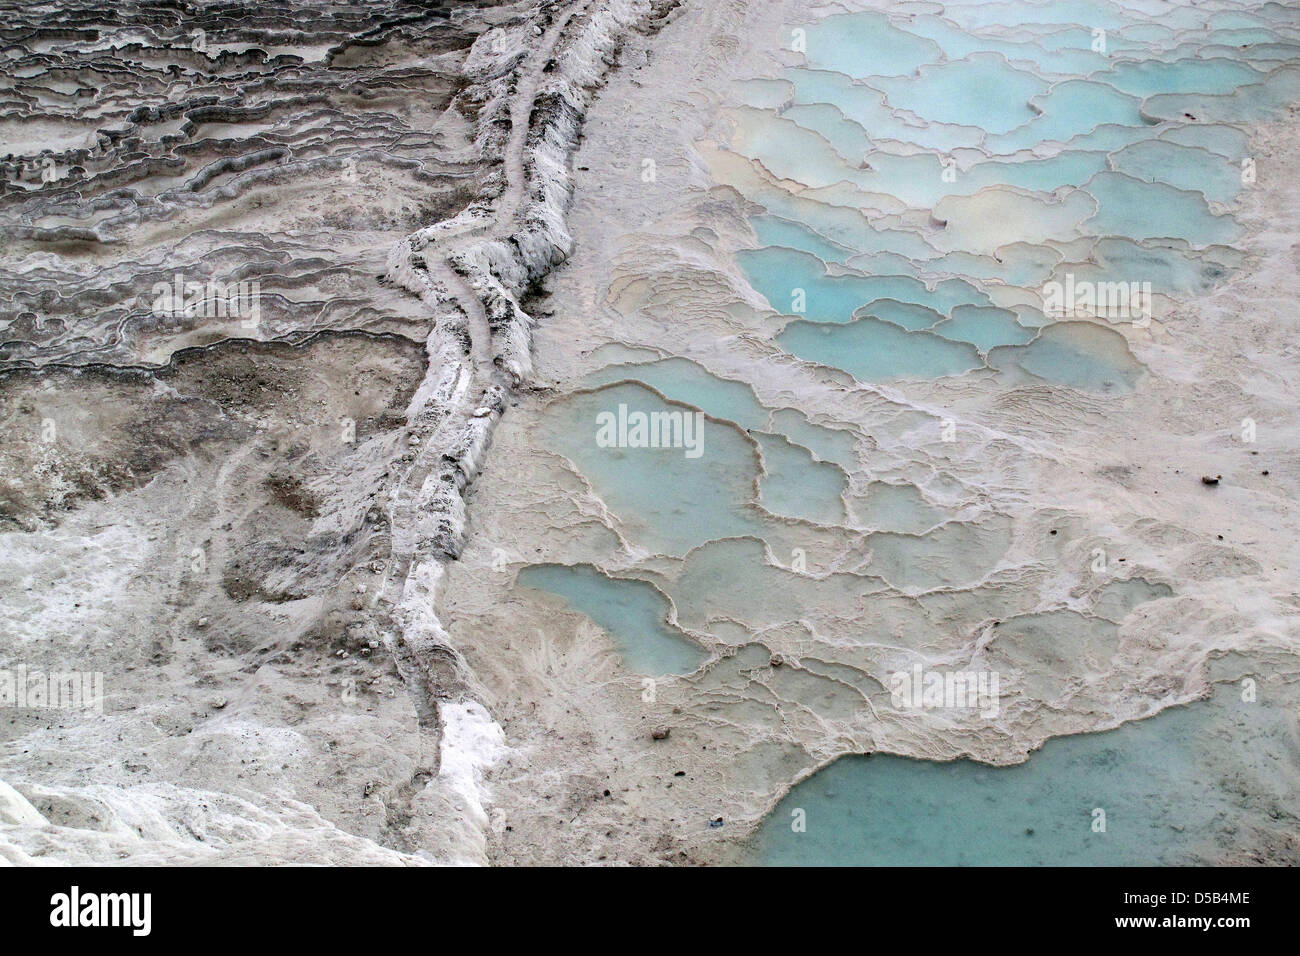 Water from thermal springs, in which the temperature lies between 30 and 40 degrees Celsius, has formed travertine terraces in Pamukkale, Turkey, 23 May 2009. The terraces are a UNESCO World Heritage Site. Photo: Tom Schulze Stock Photo